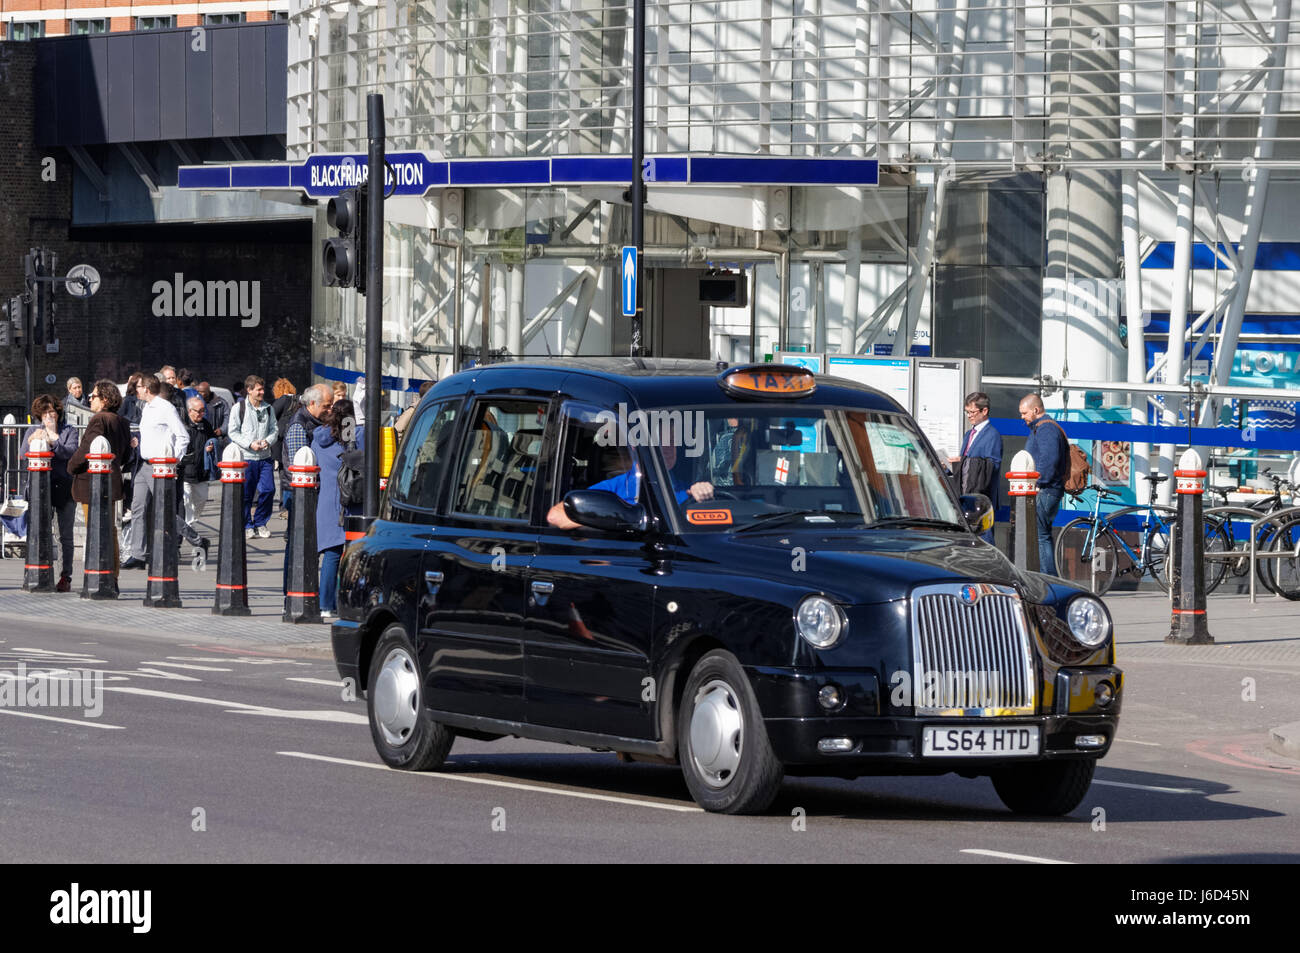 Black taxi cab in front of Blackfriars tube station, London England United Kingdom UK Stock Photo